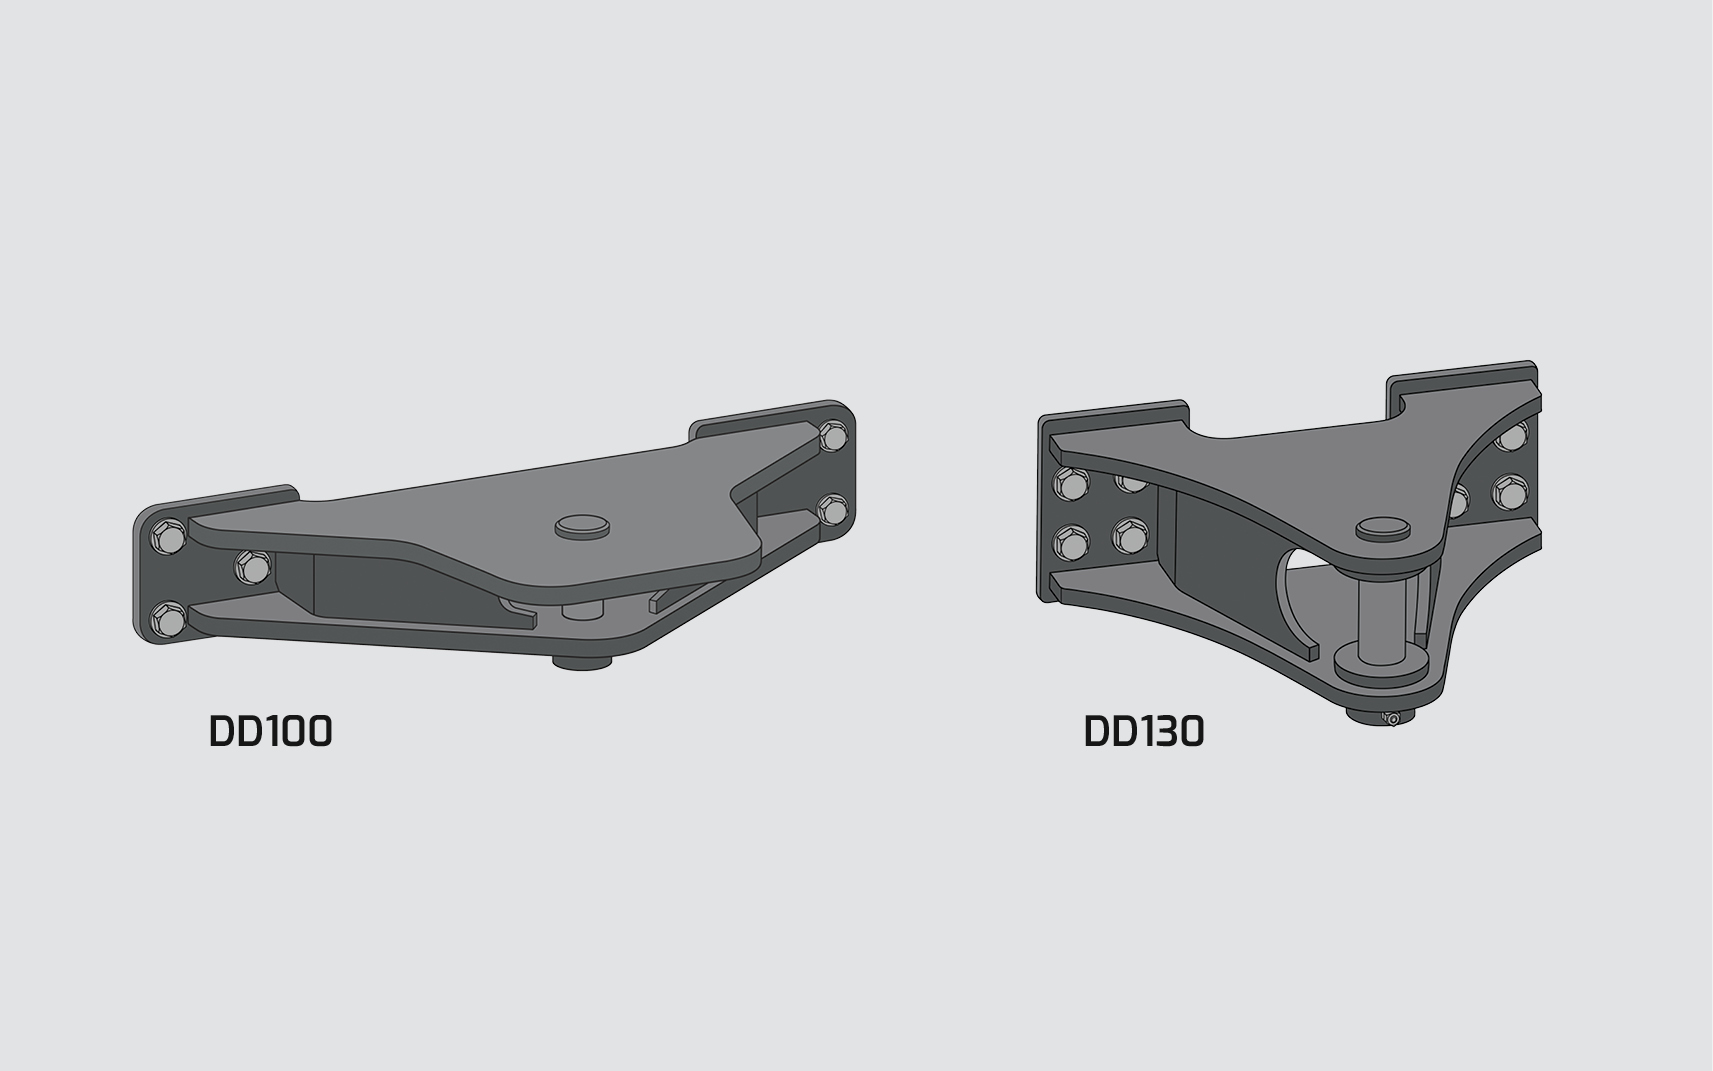 A rendering of the DEVELON towing drawbar attachment for the DD100 and DD130 dozers.